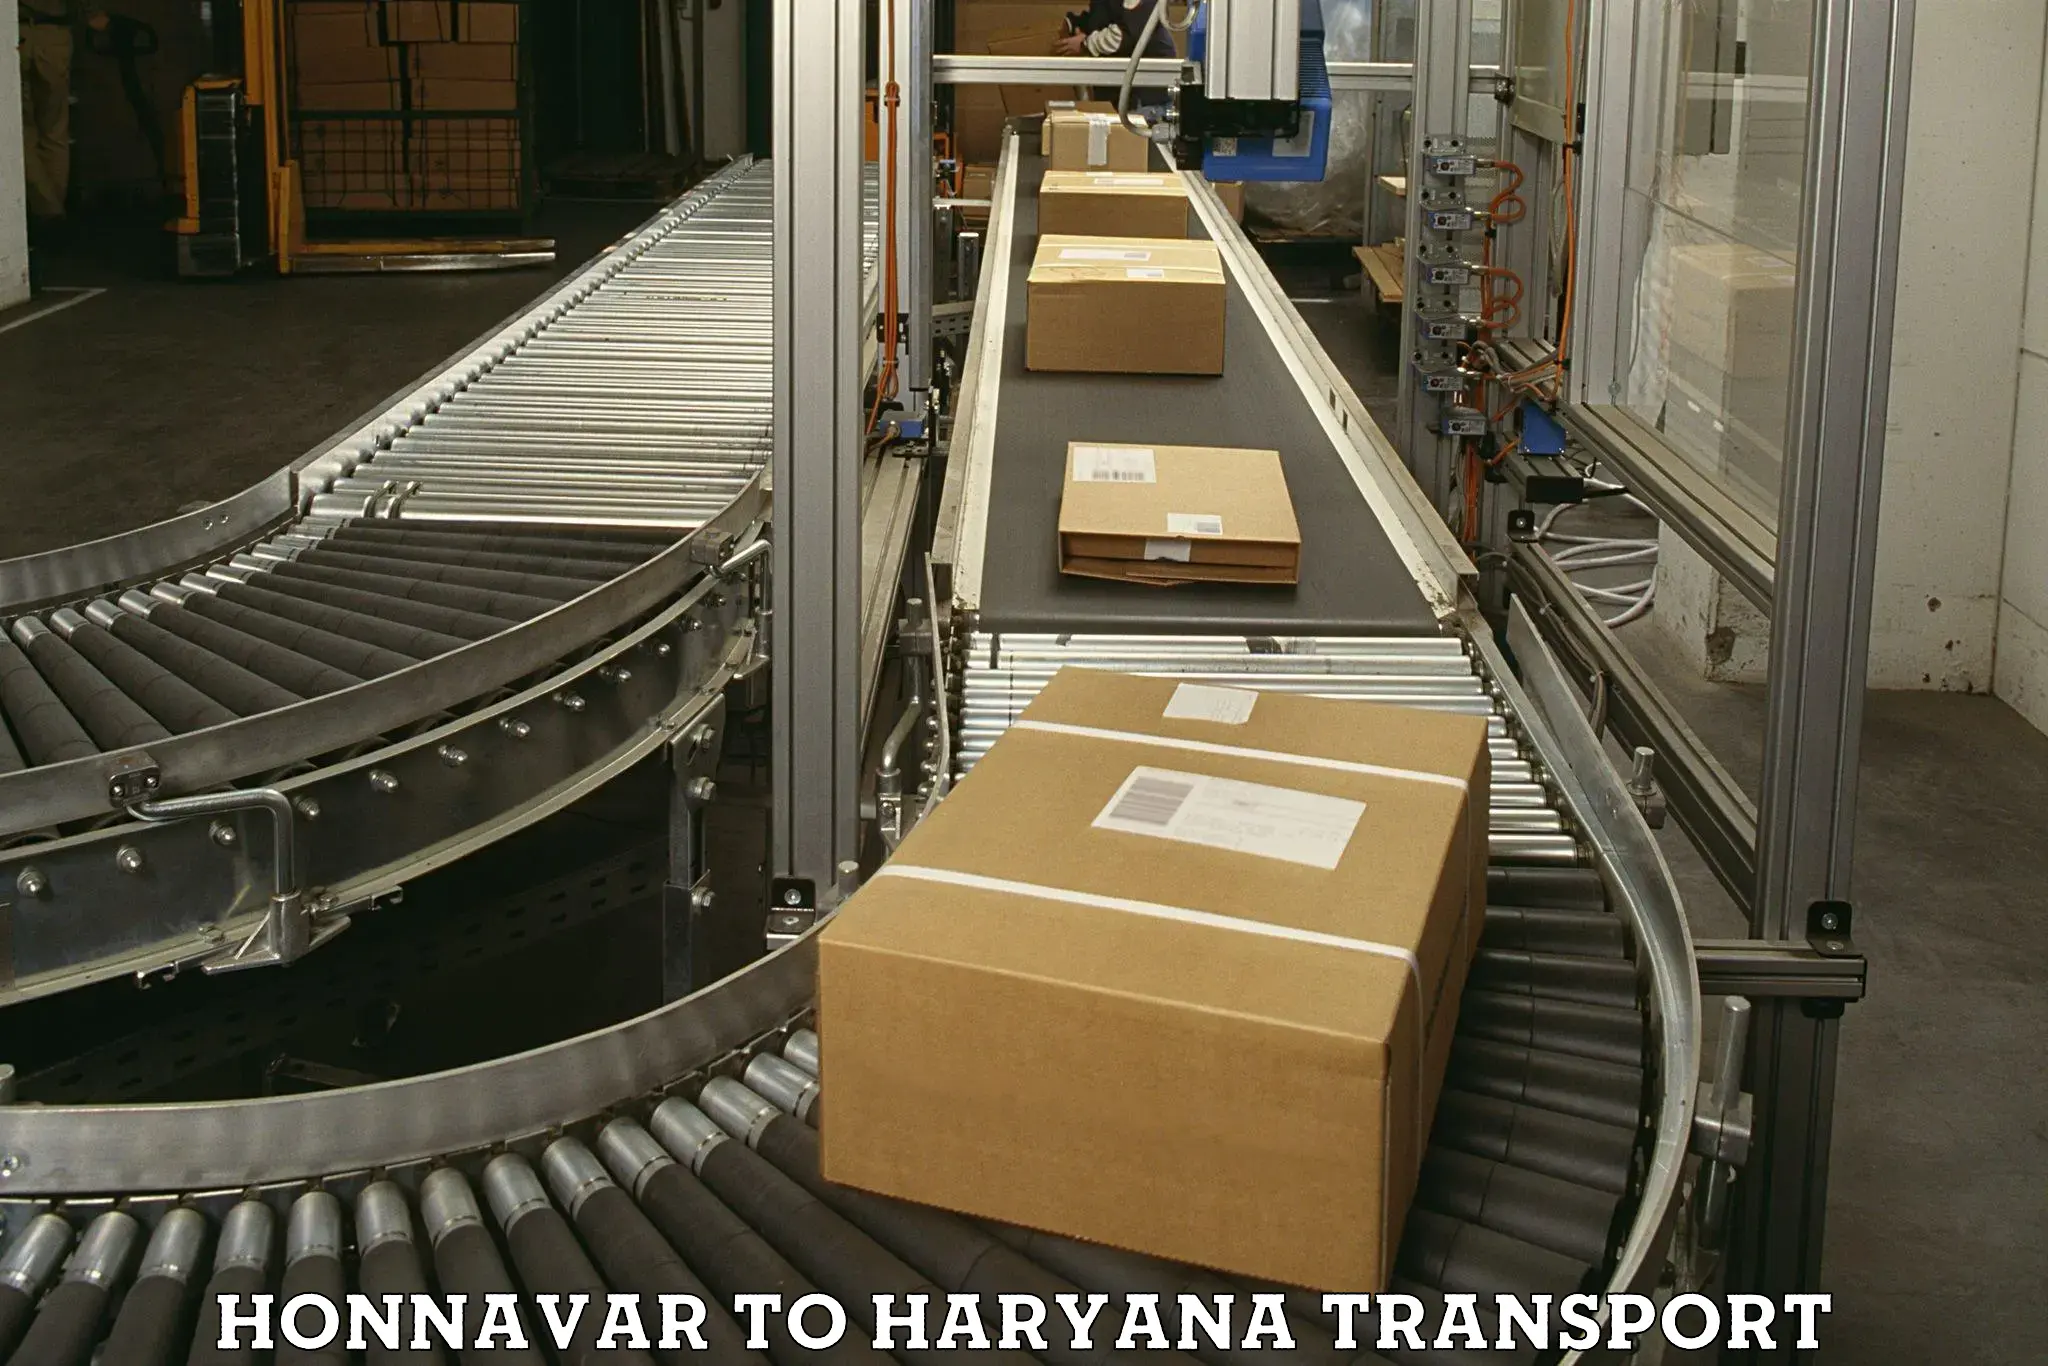 Transport bike from one state to another Honnavar to Haryana